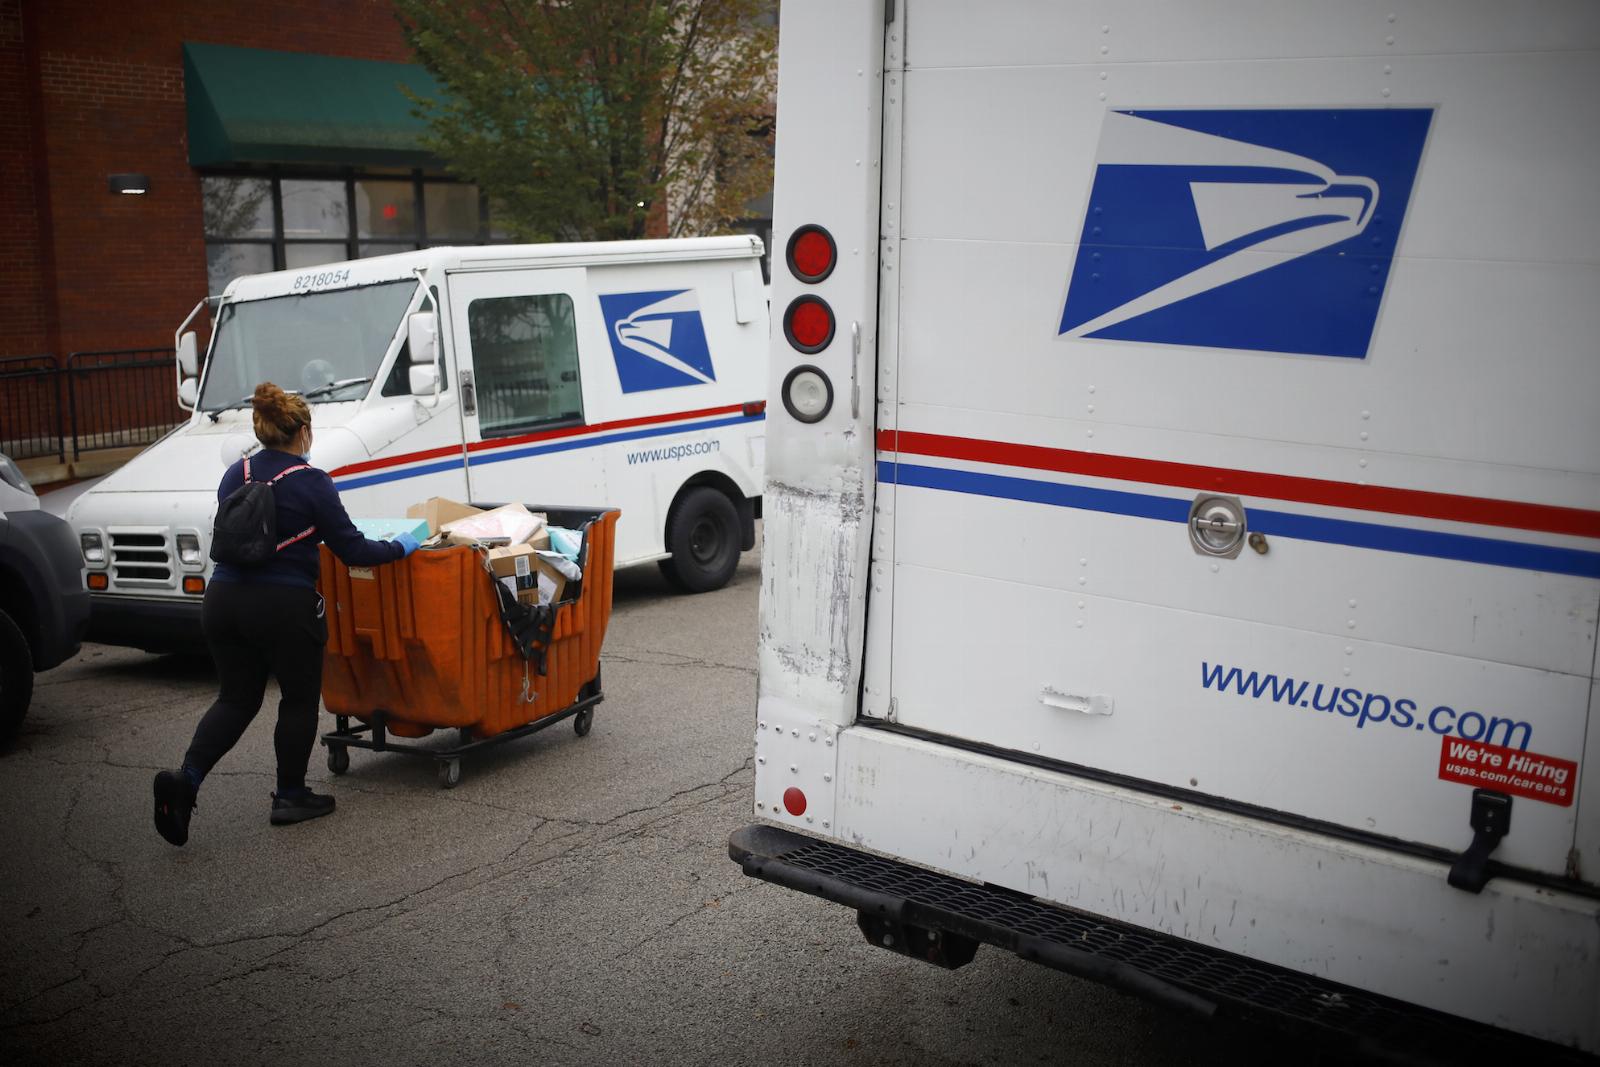 The life-upending flaw that USPS won’t fix